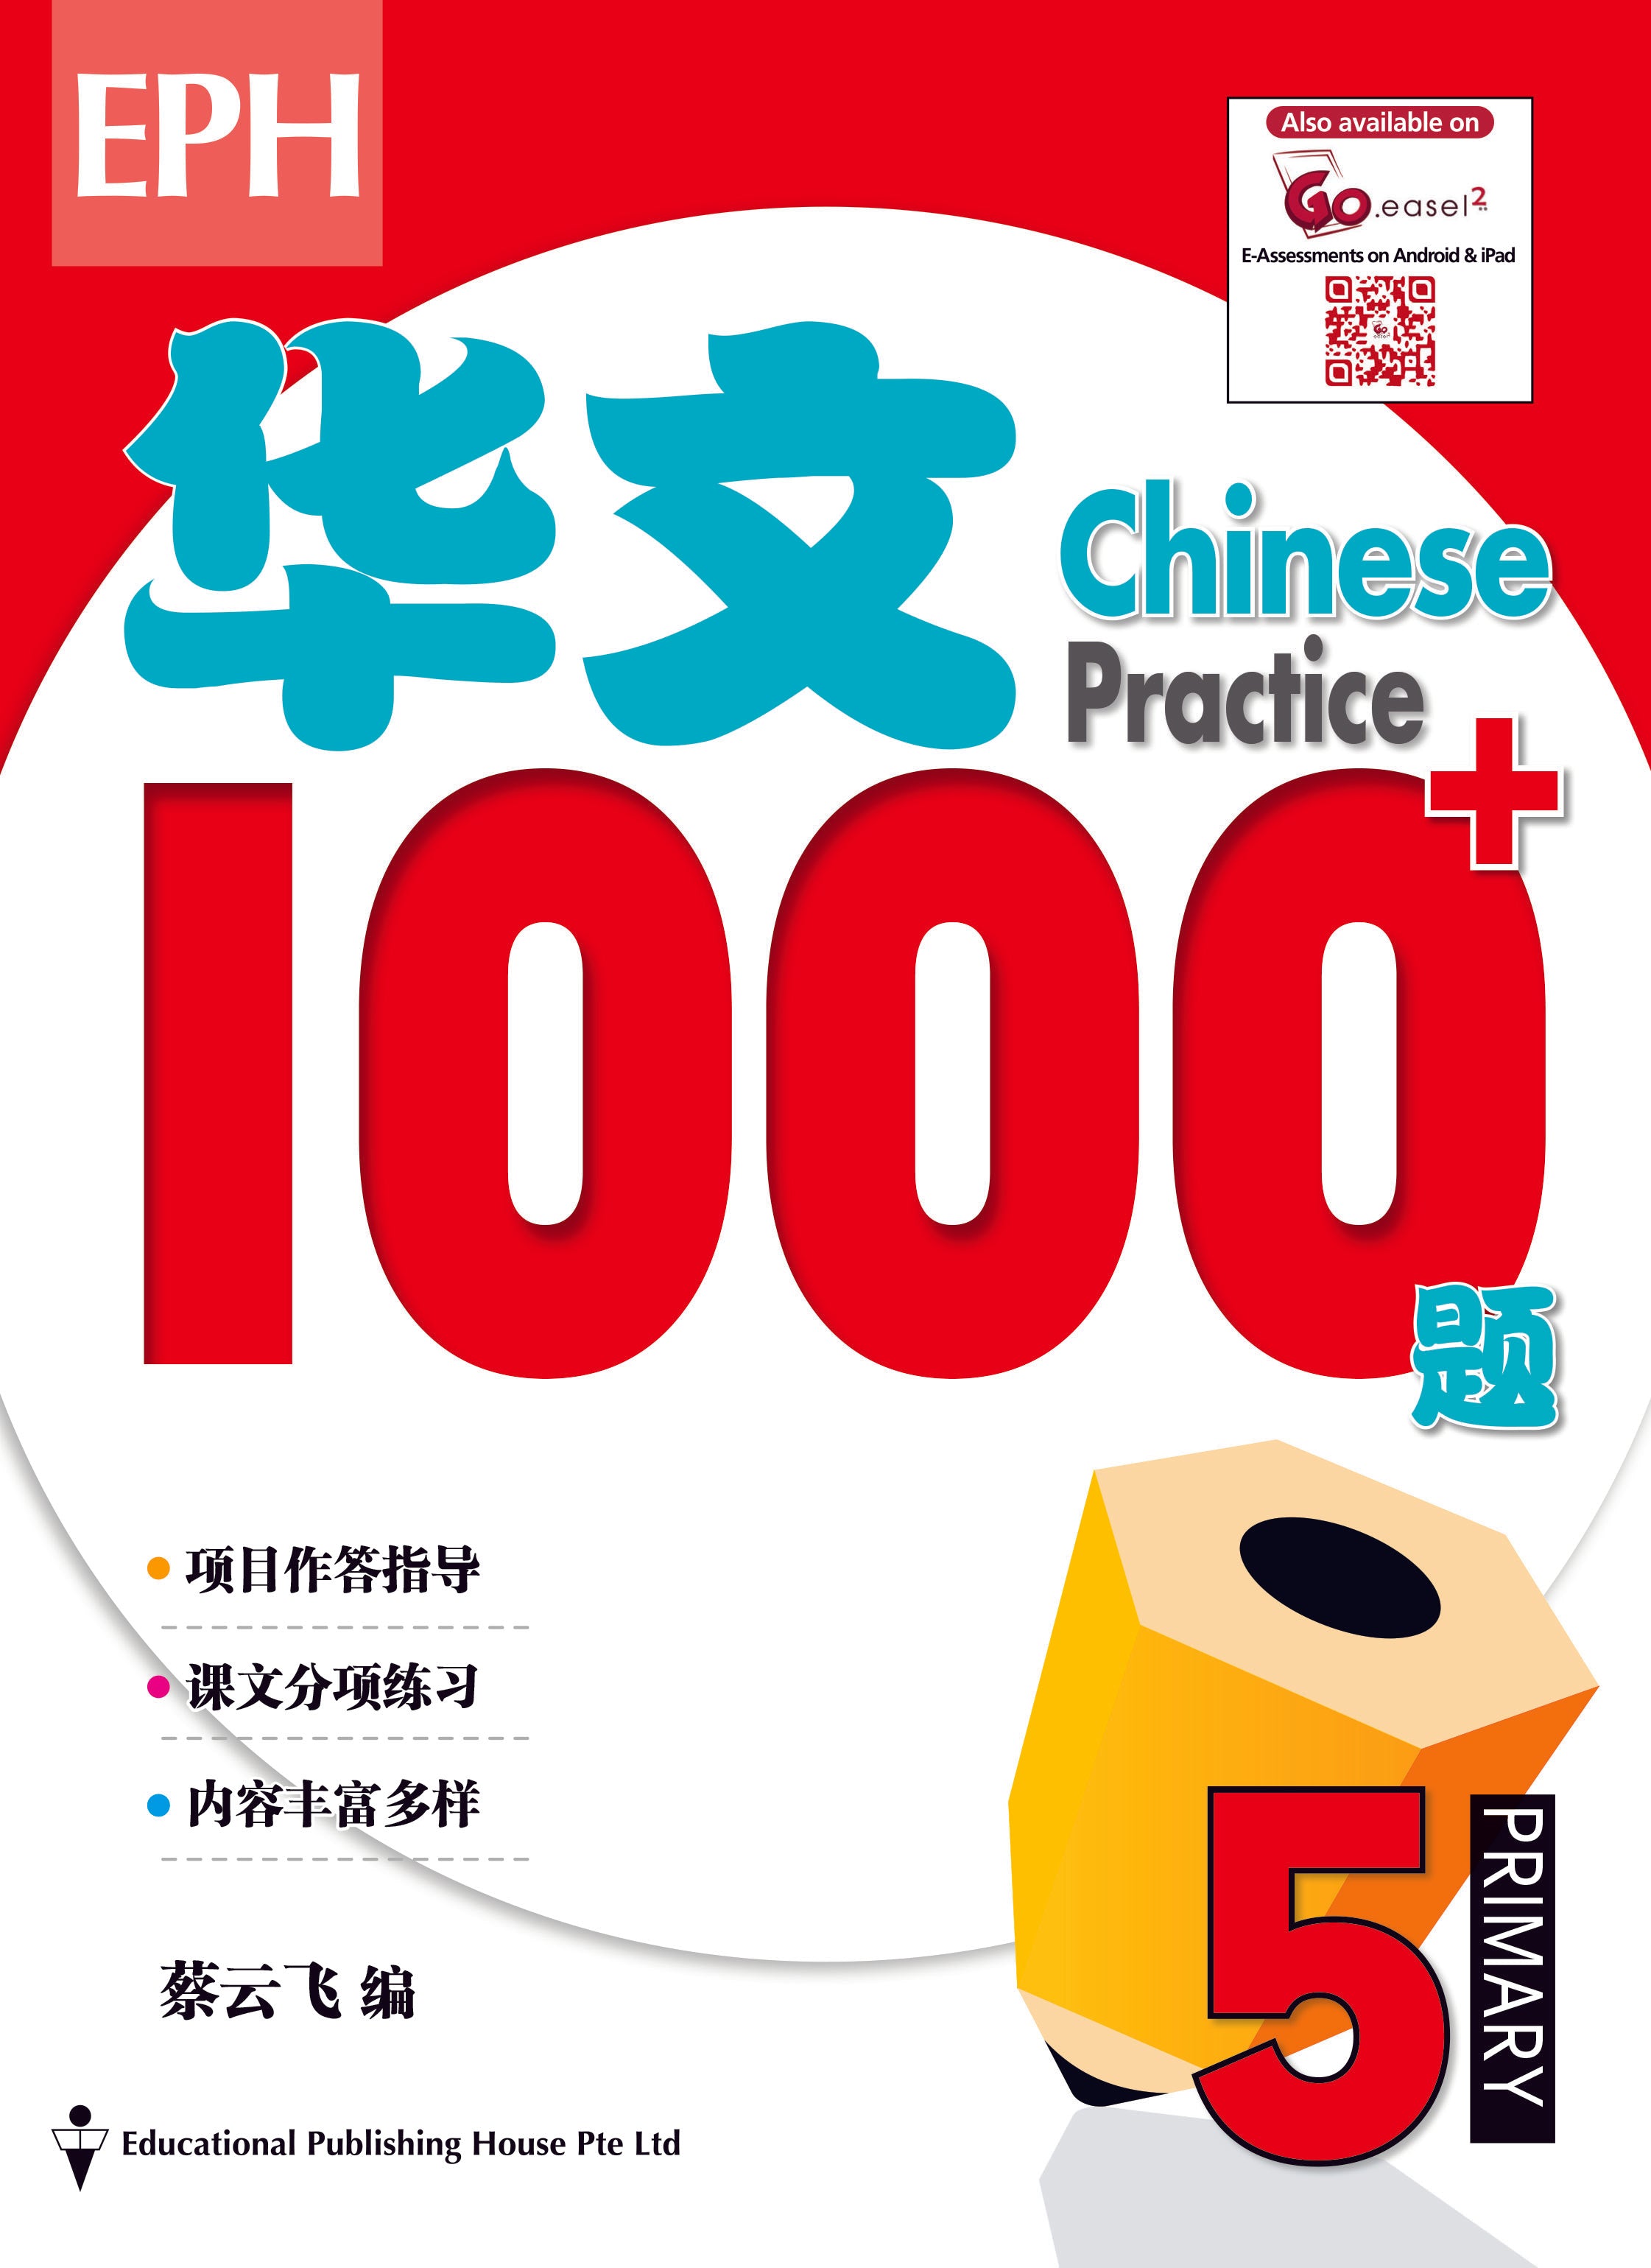 Primary 5 Chinese Practice 1000+ 华文1000题 - _MS, CHALLENGING, CHINESE, EDUCATIONAL PUBLISHING HOUSE, PRIMARY 5